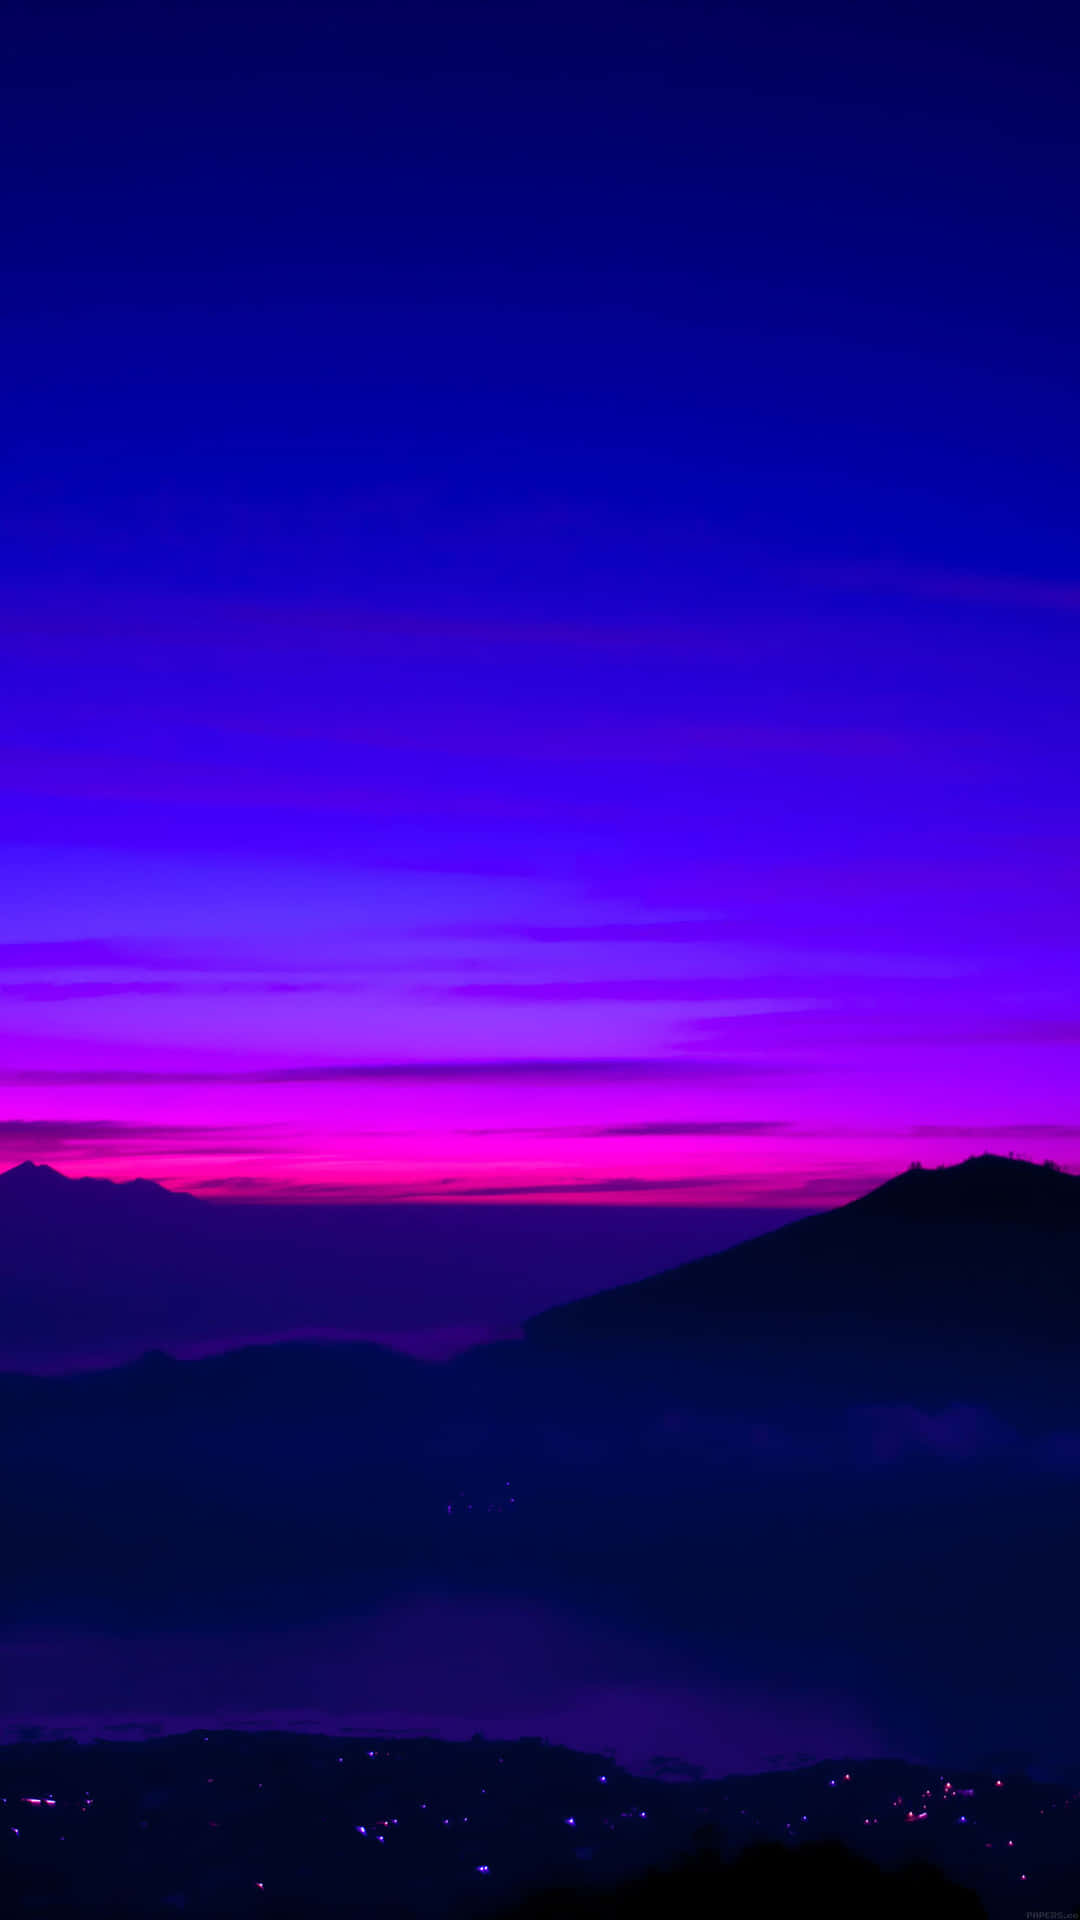 Foggy Mountains On A Blue And Purple Sunset Wallpaper